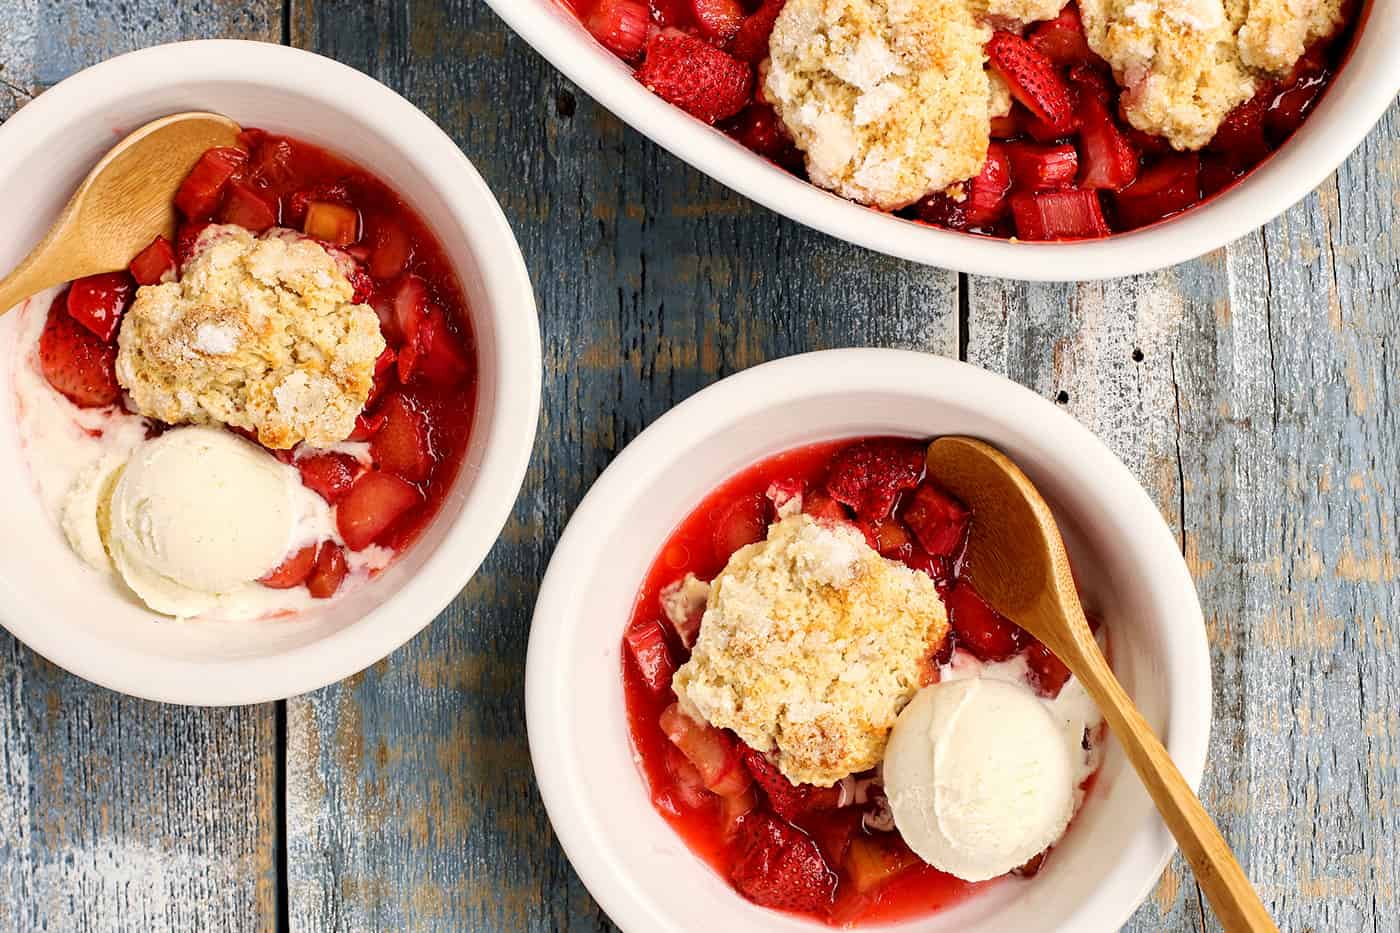 Overhead view of two servings of Strawberry Rhubarb Cobbler in bowls with vanilla ice cream